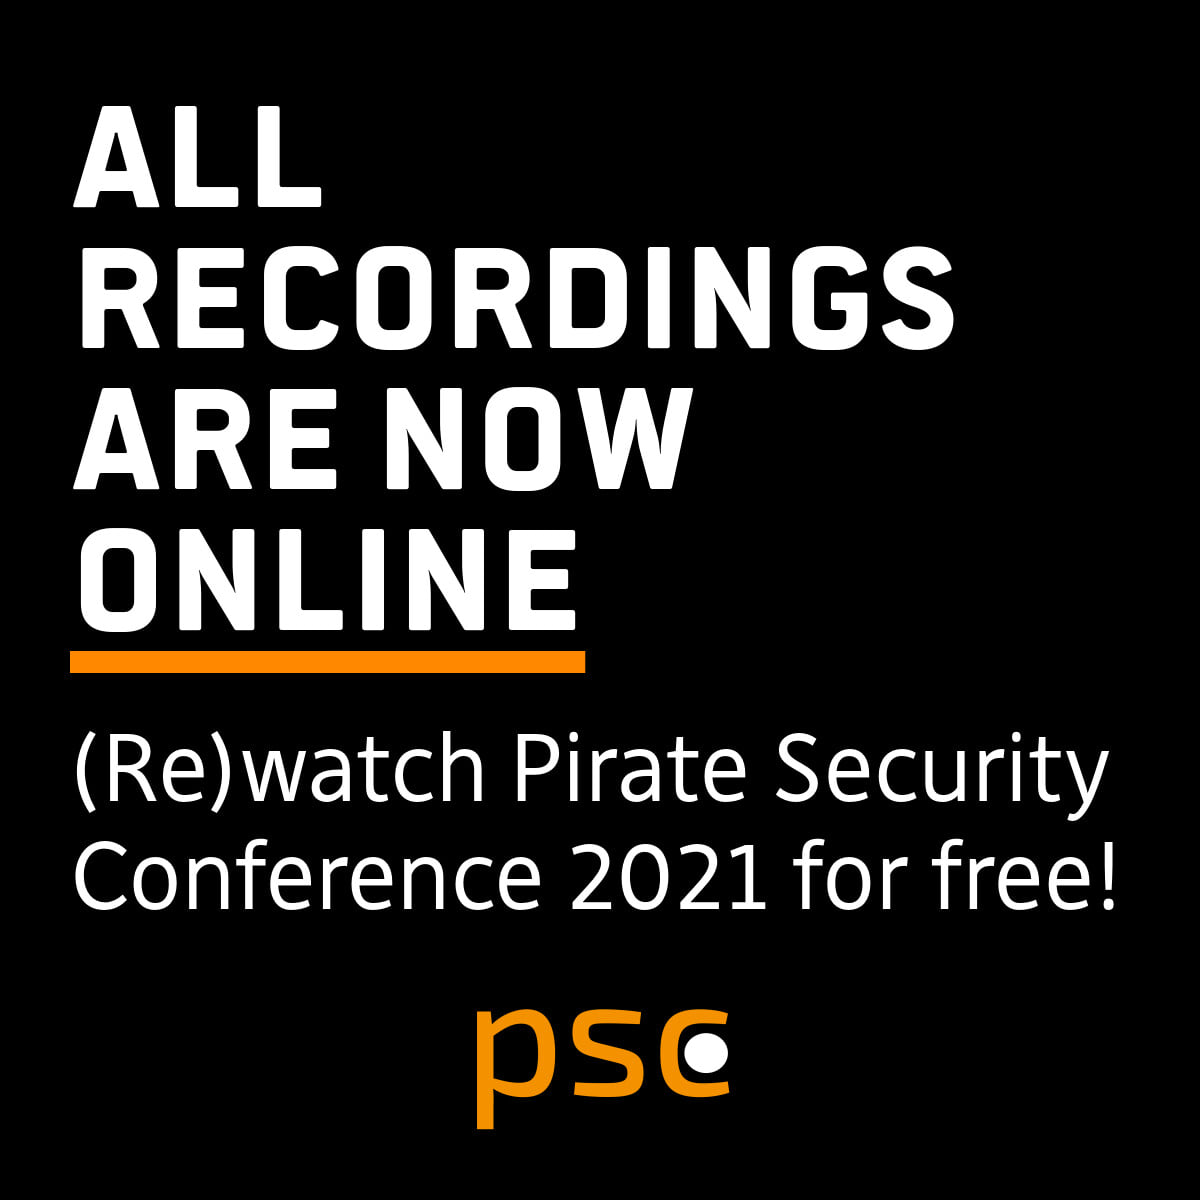 Pirate Security Conference.jpg